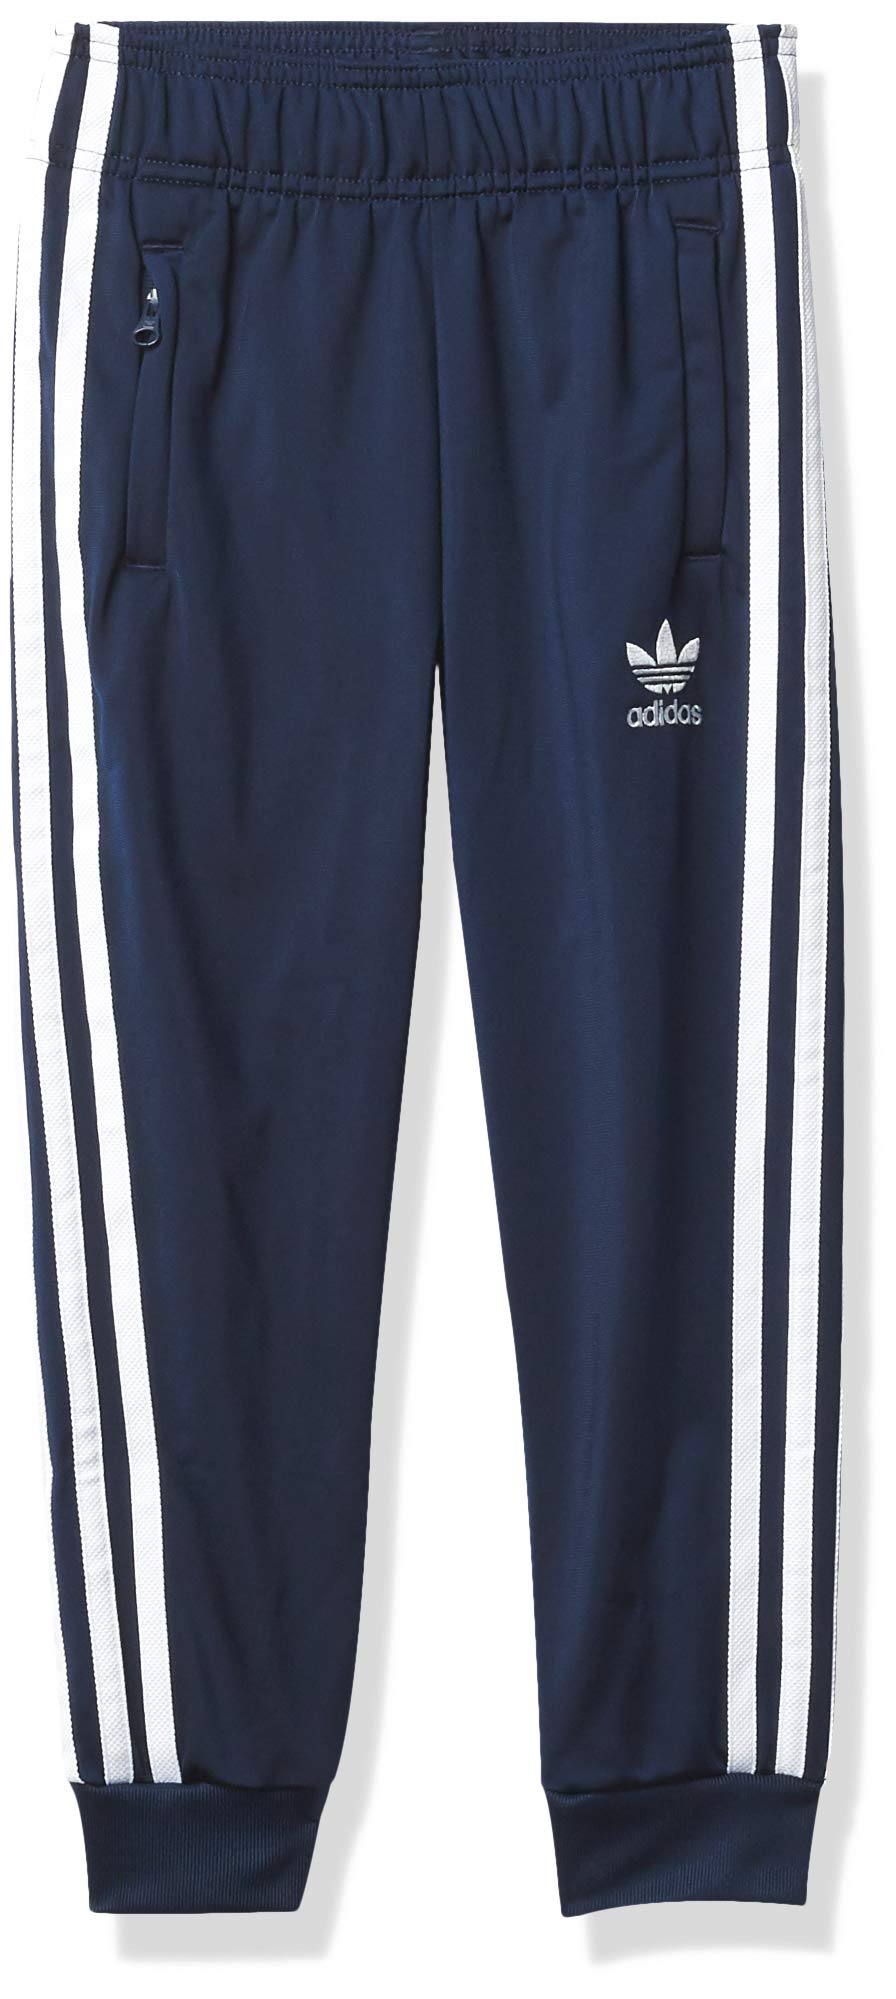 Adidas SST Track Pants in Navy